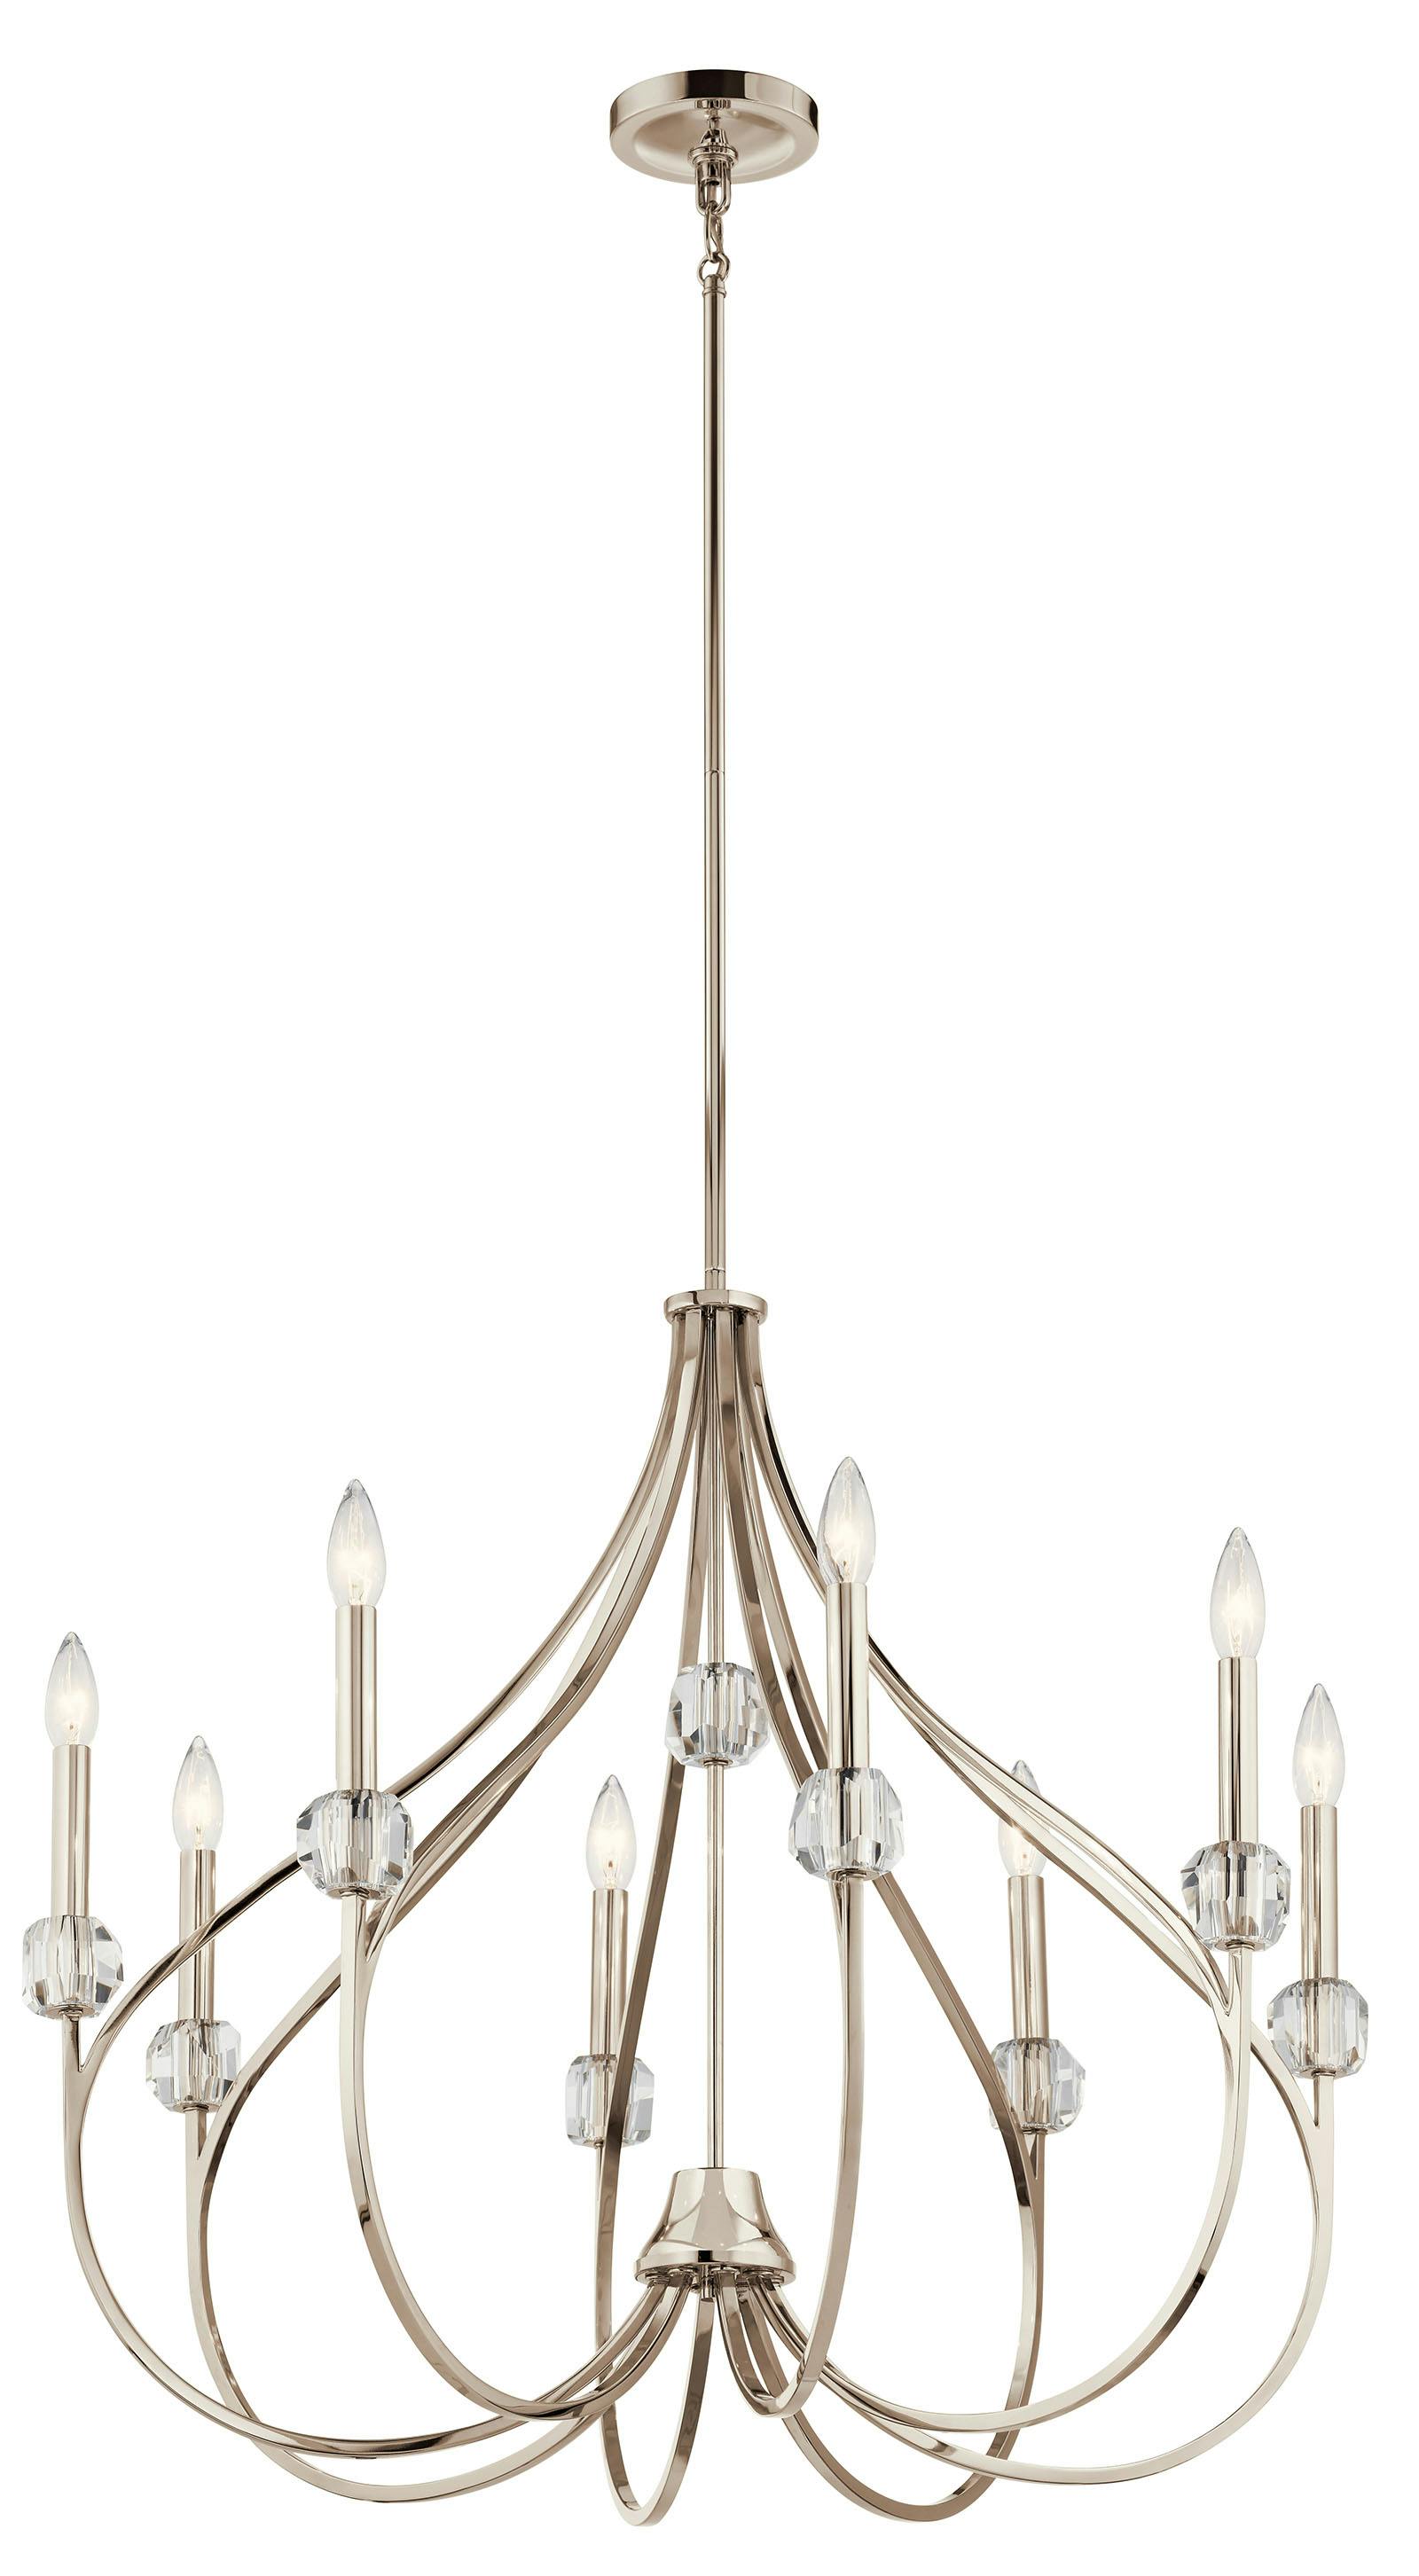 Eloise 8 Light Chandelier Polished Nickel on a white background